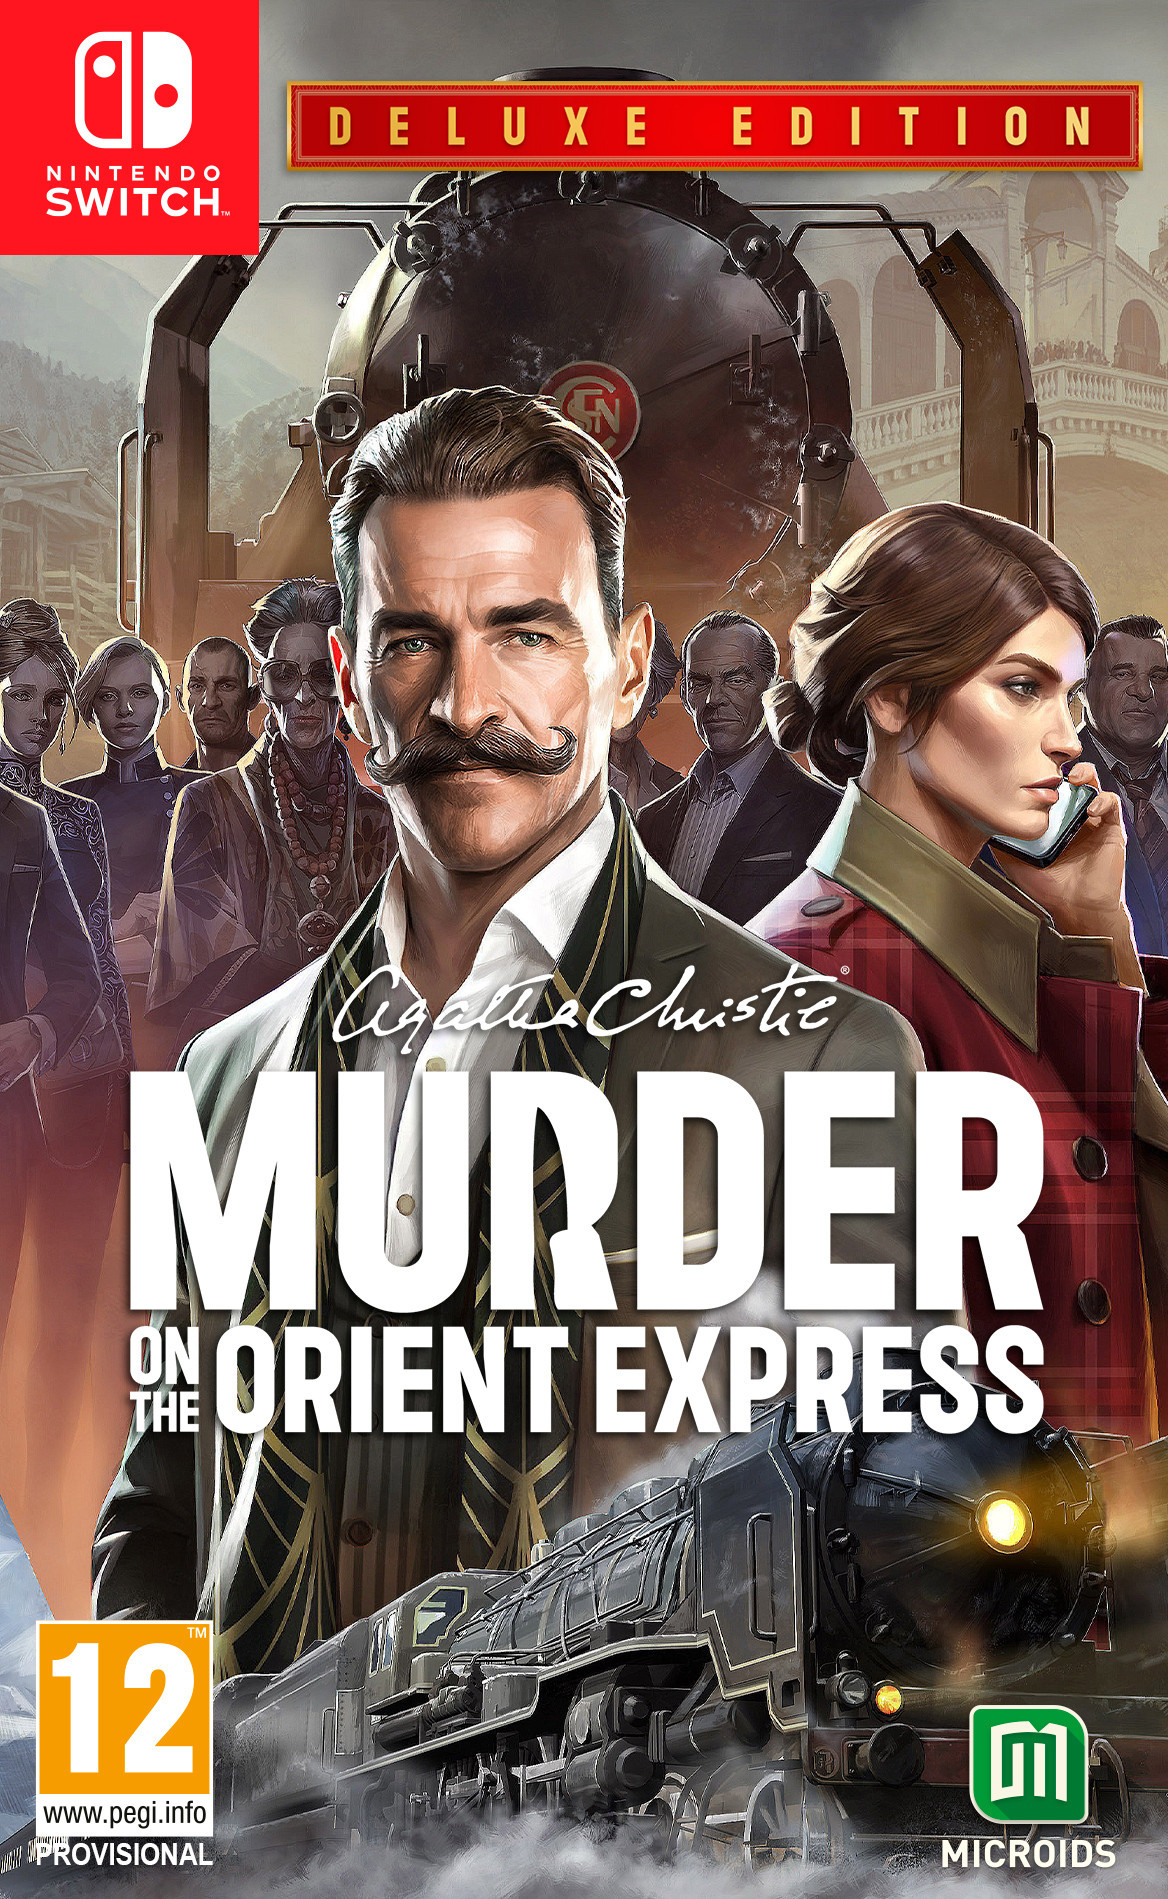 Agatha Christie Murder on the Orient Express Deluxe Edition